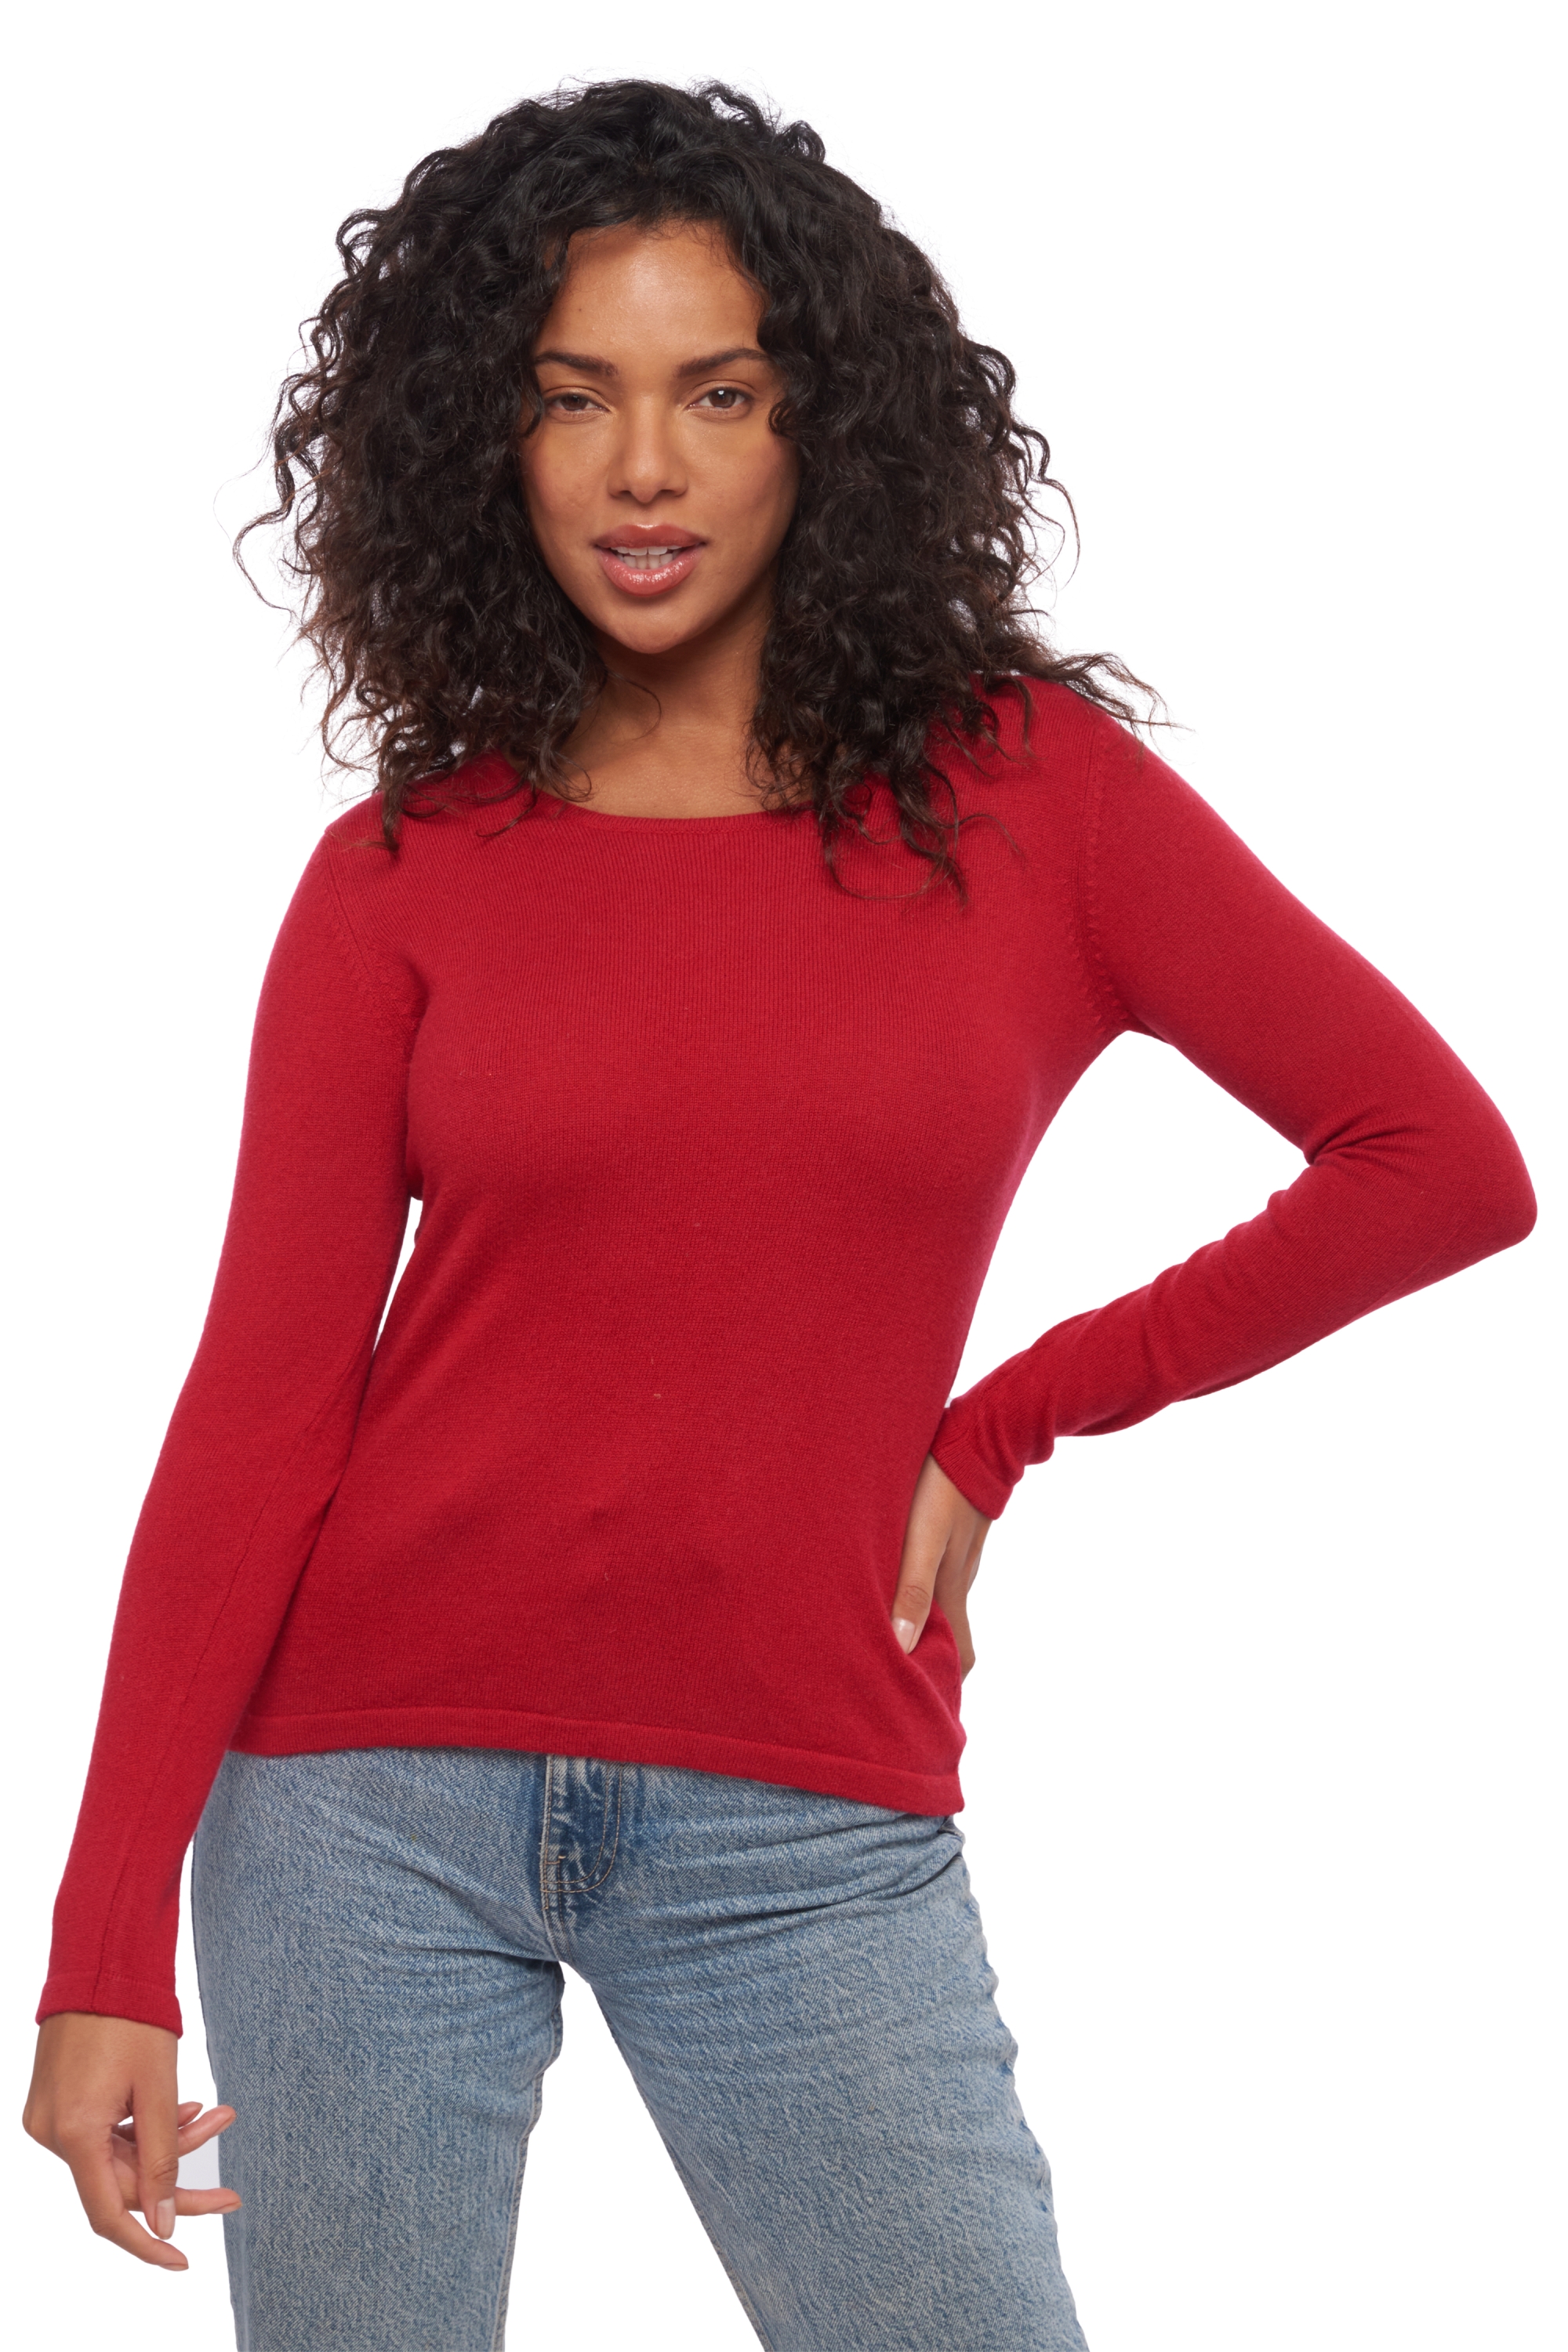 Cashmere ladies spring summer collection solange blood red xl